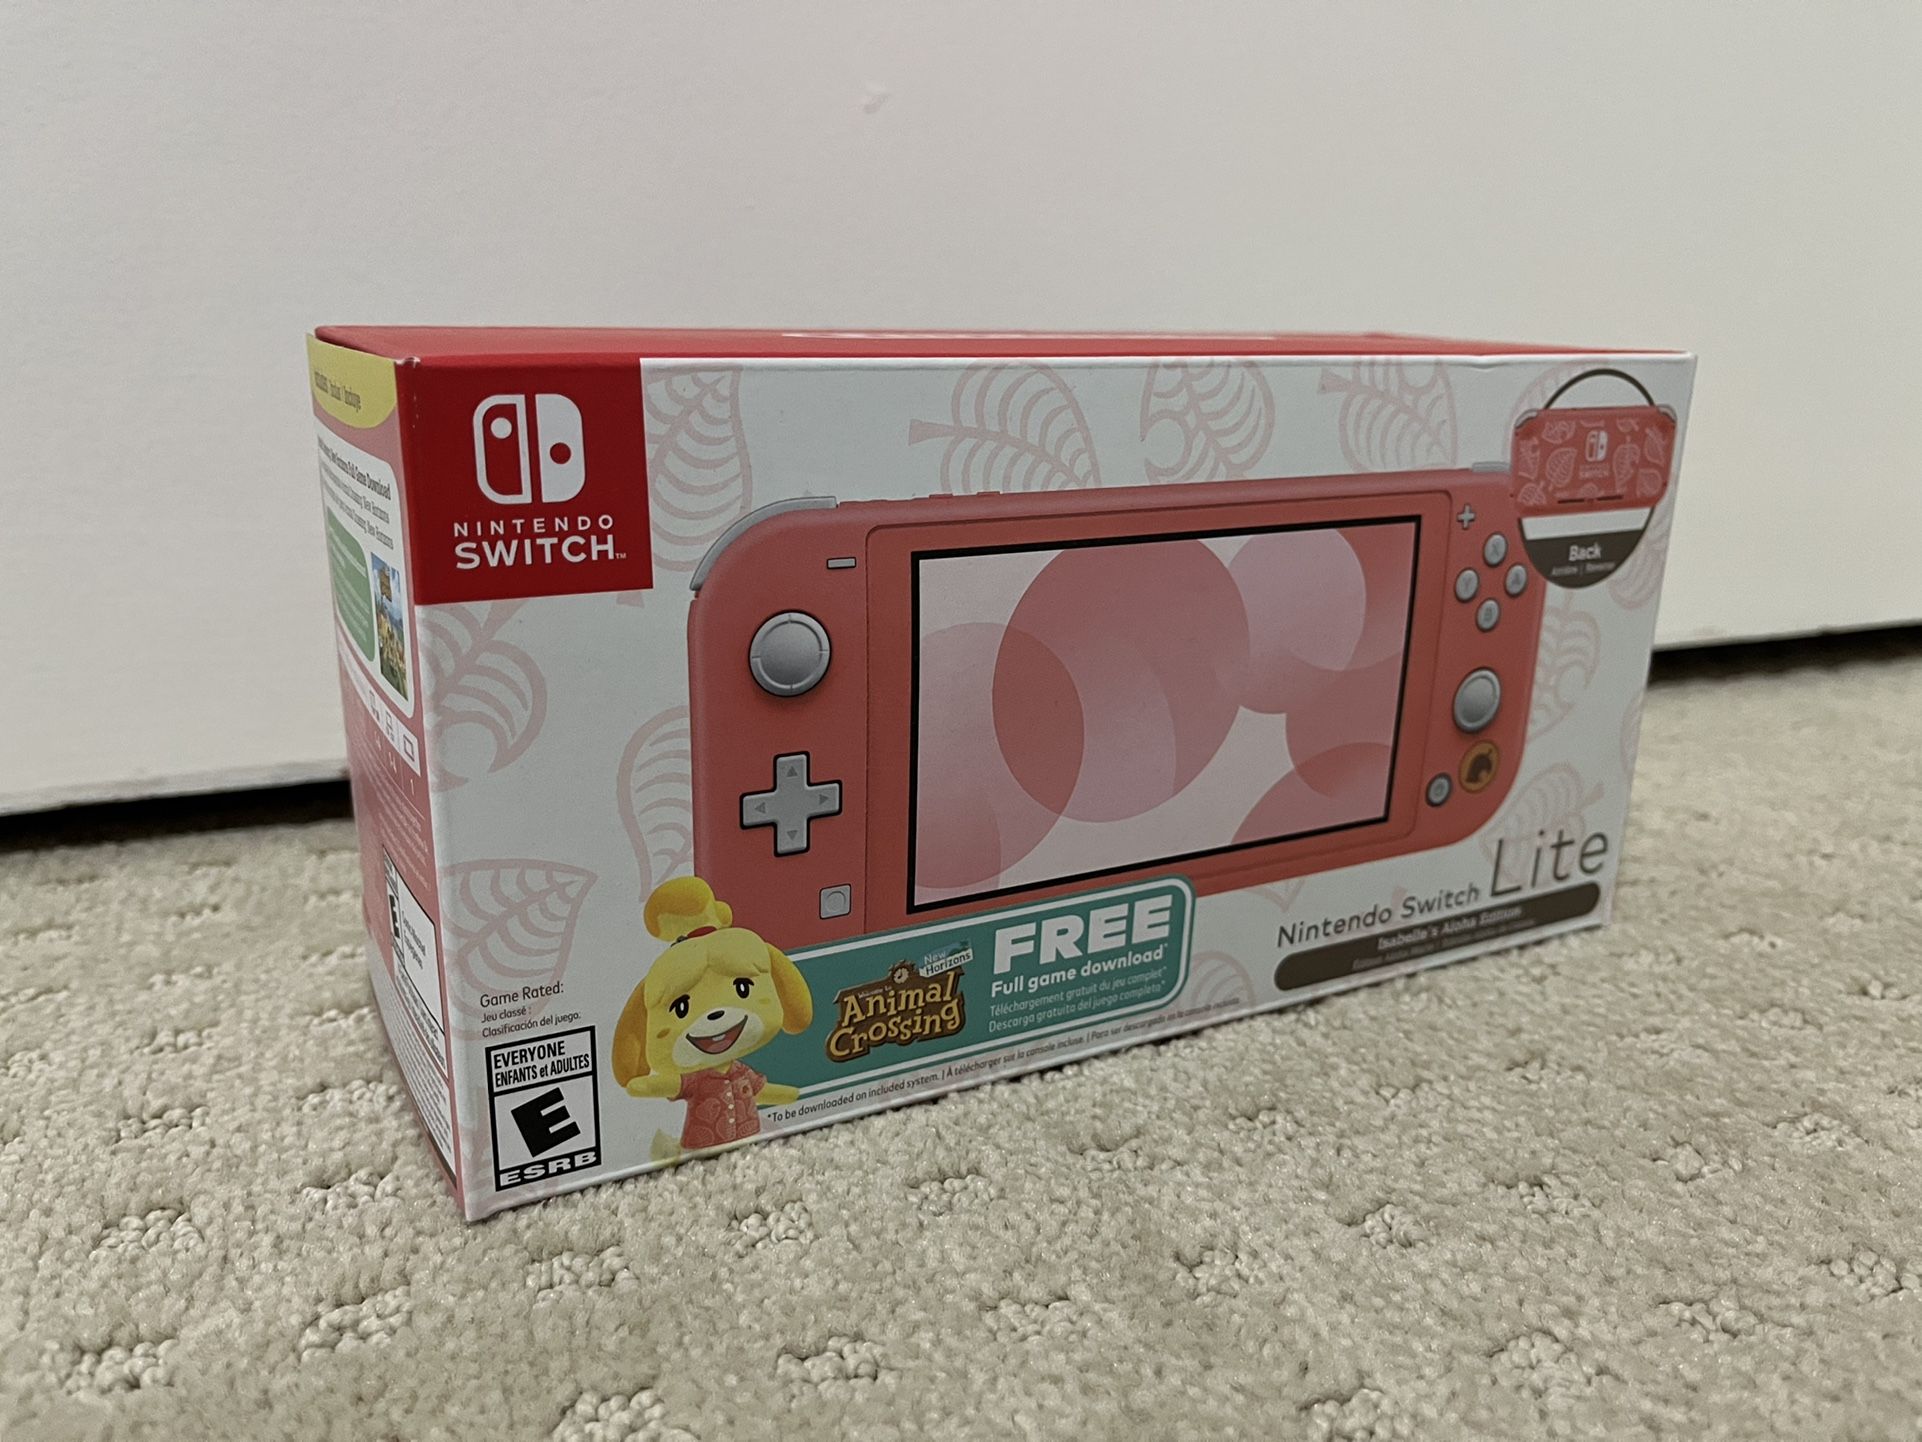 Nintendo Switch Lite - Isabelle’s Aloha Edition (comes w/ free Animal Crossing download) - Brand New!